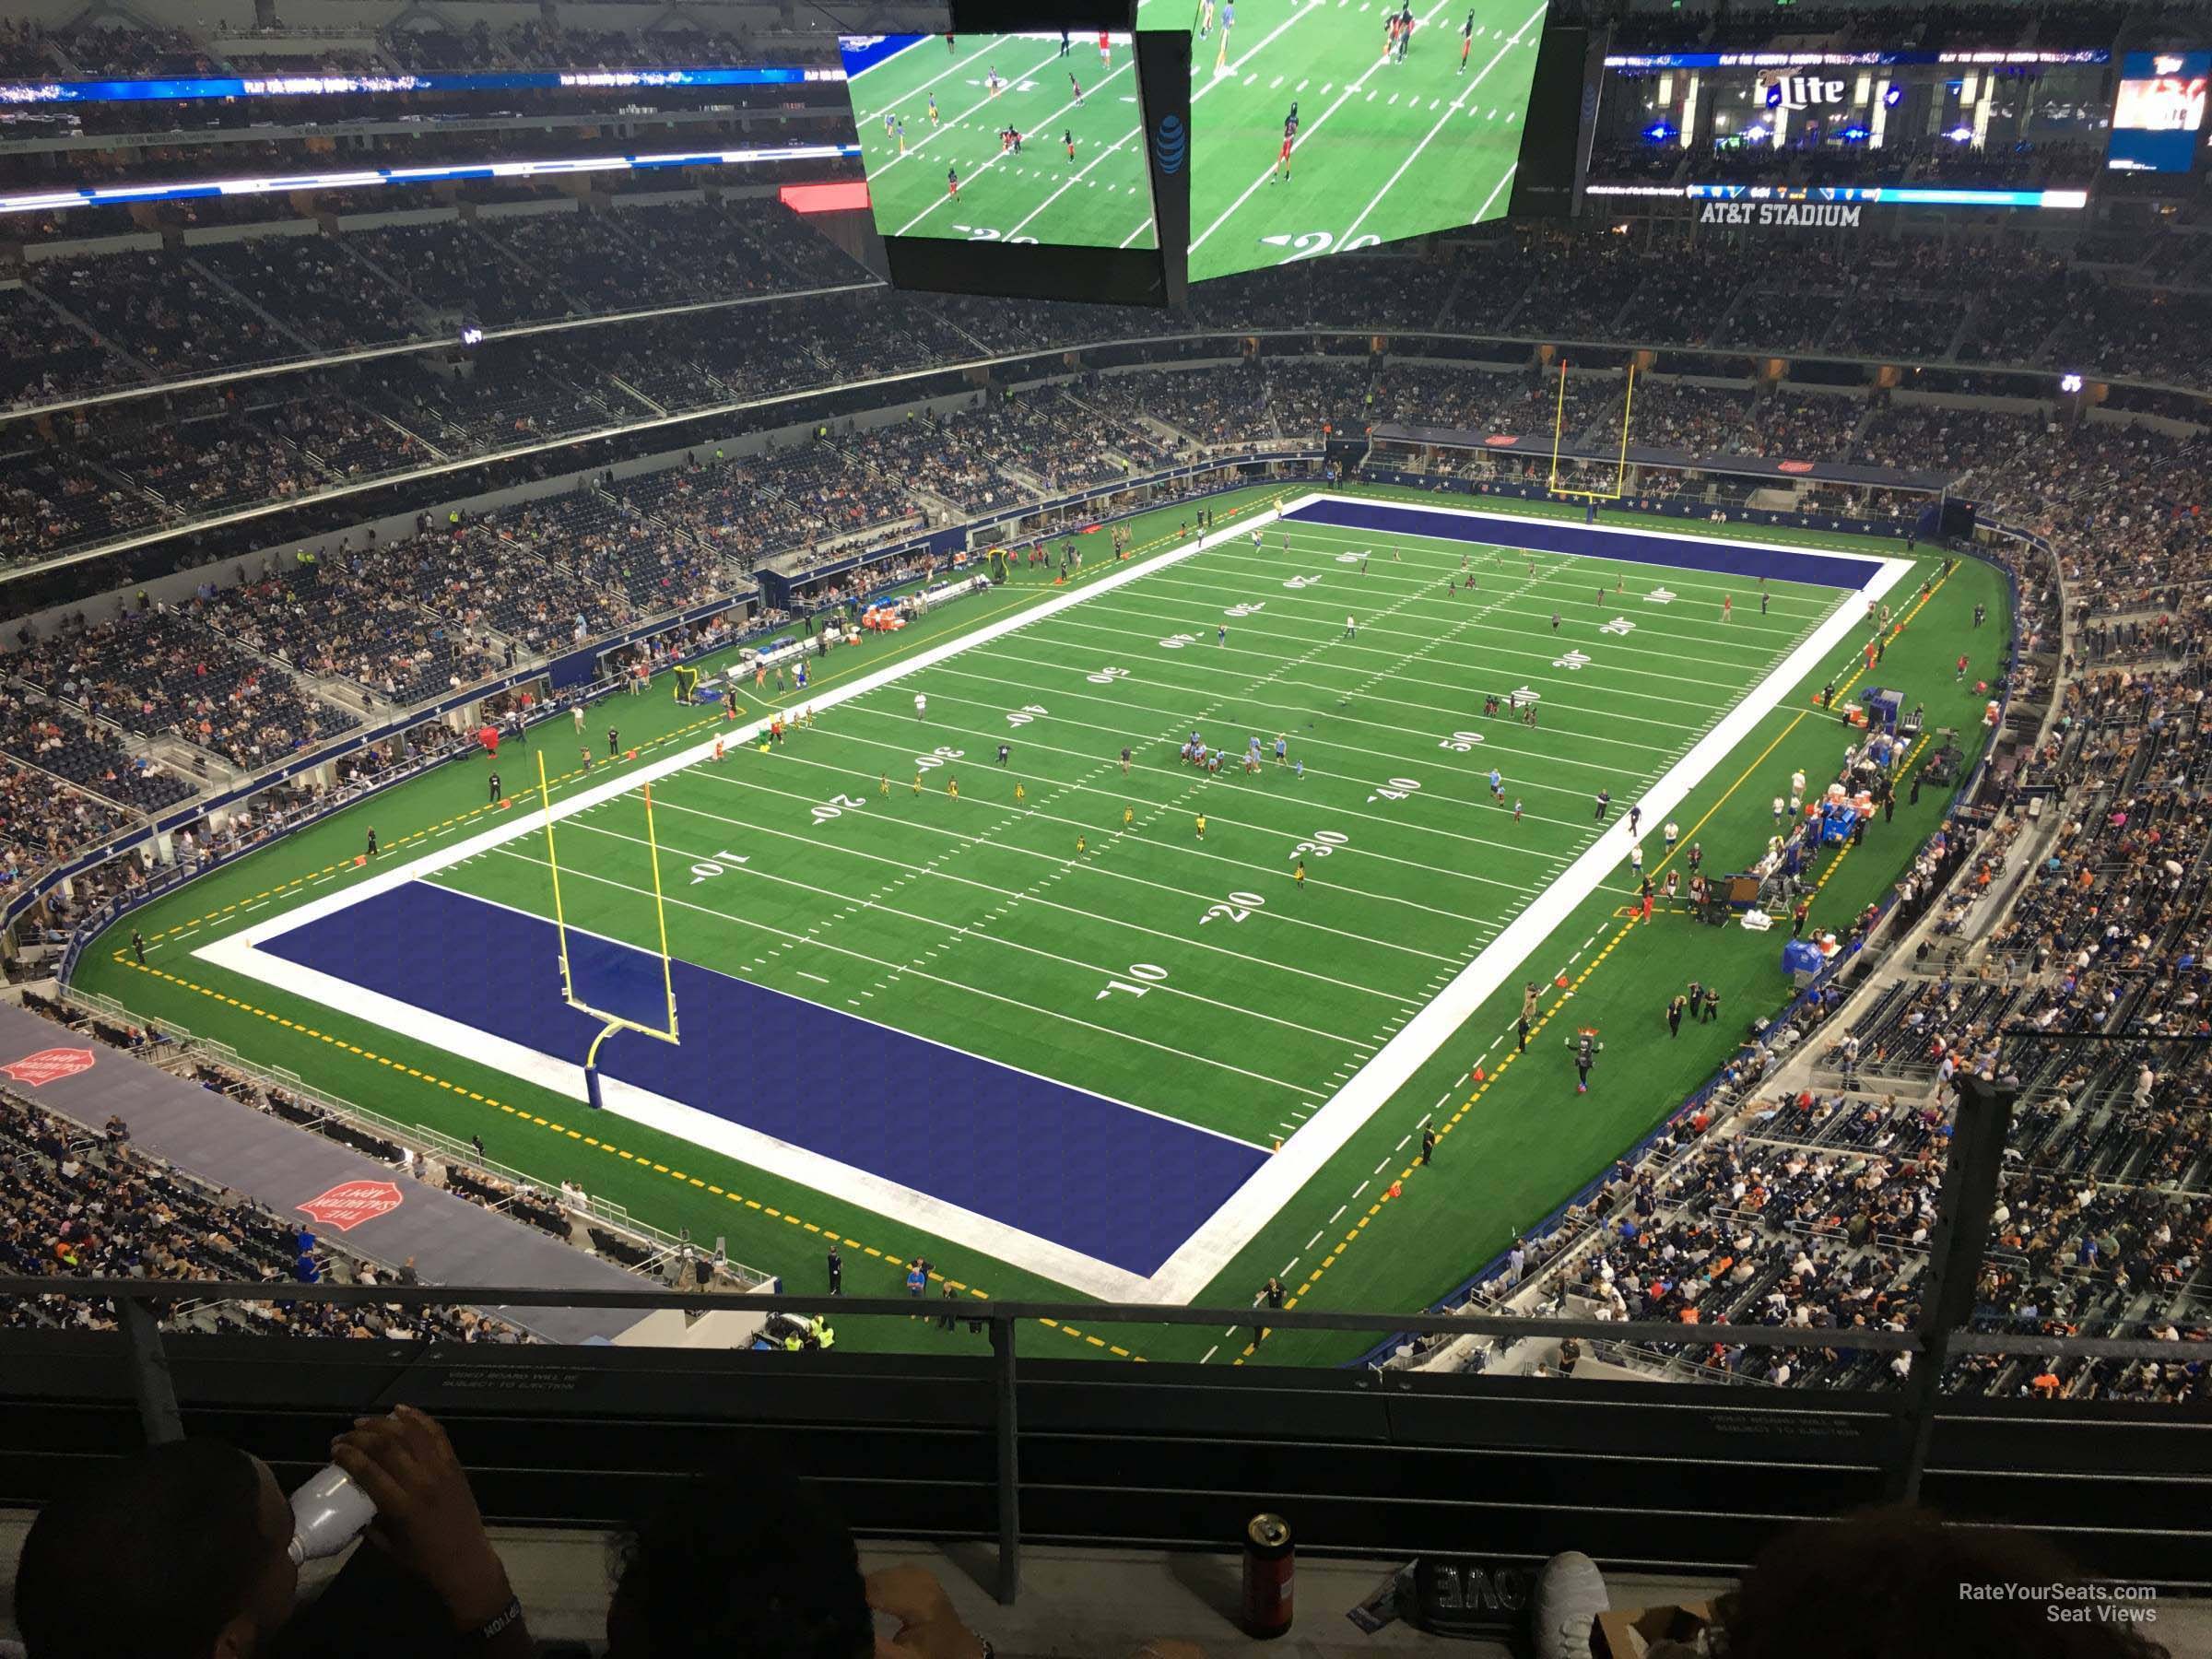 section 451, row 4 seat view  for football - at&t stadium (cowboys stadium)